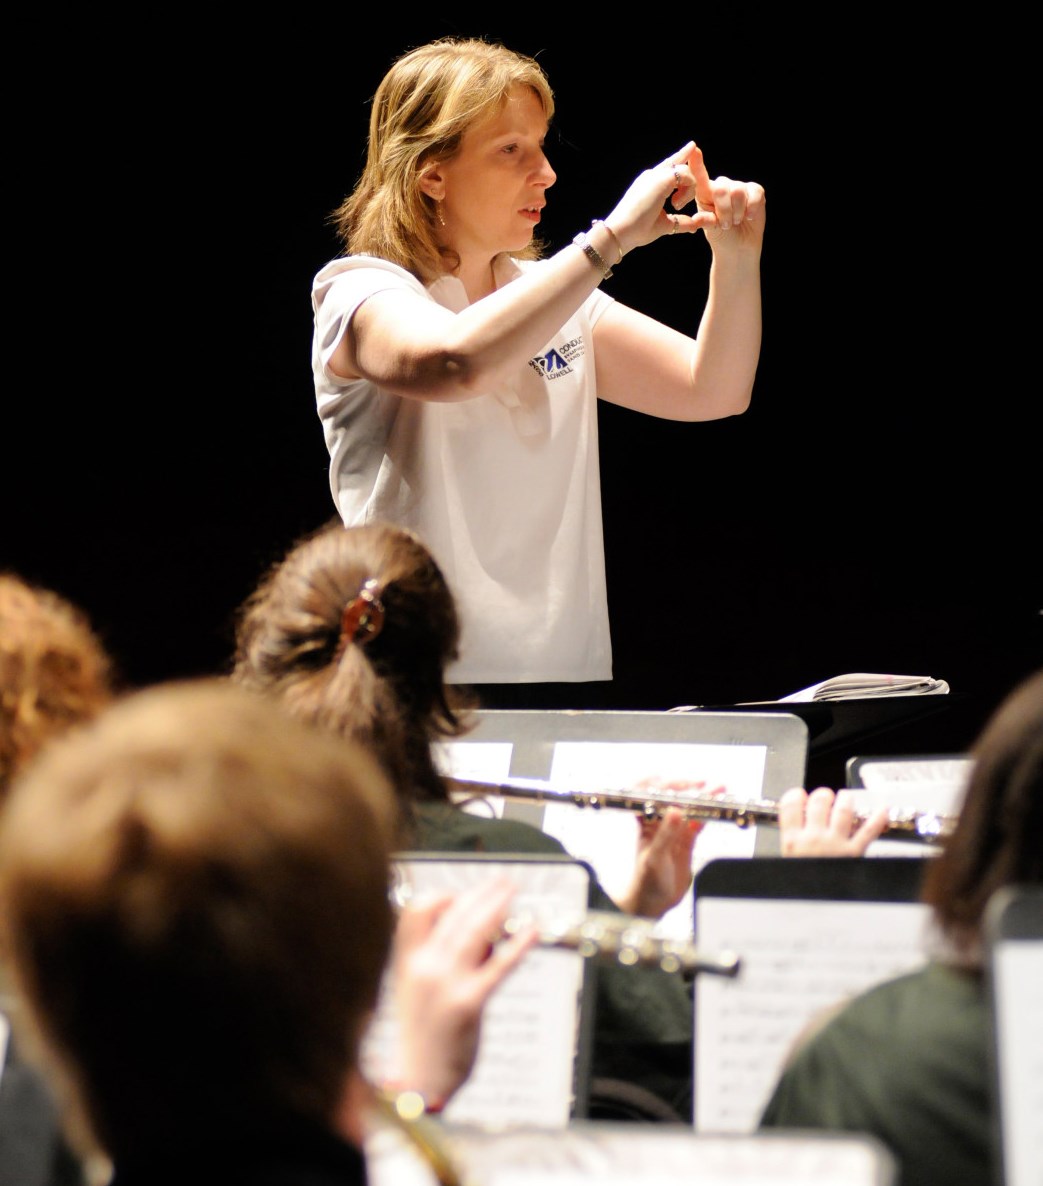 Conductor Deb Huber of the University of Massachusetts Lowell explains a musical phrase to her concert band ensemble.